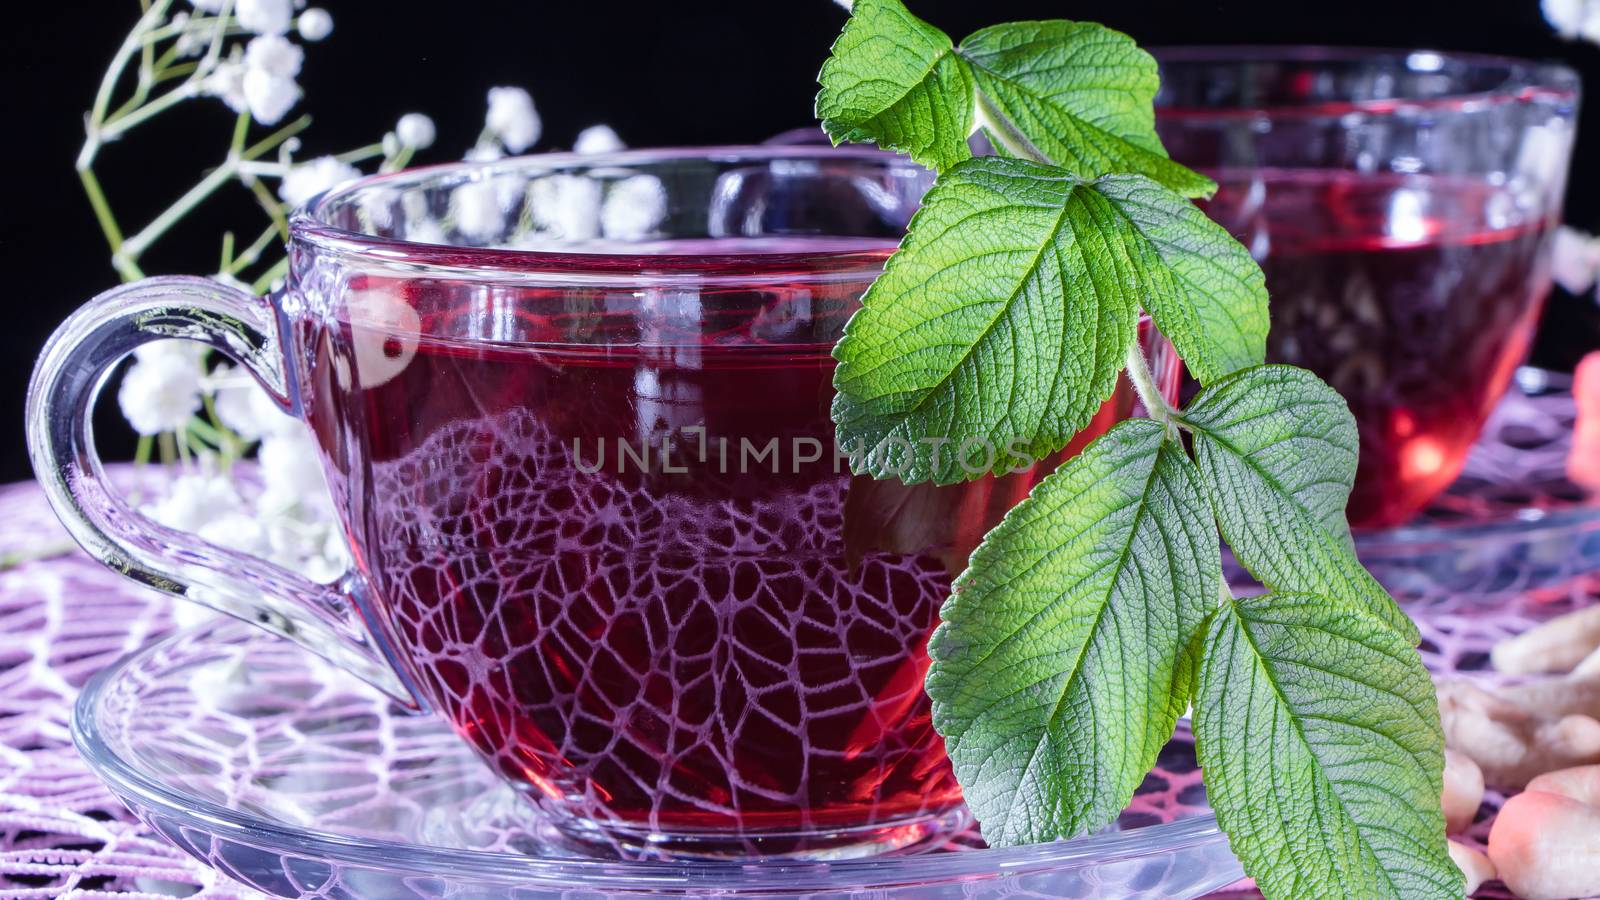 Hibiscus red tea mug with tea leaf or mint leaf close-up horizontal photo.Medicinal therapy on medicinal herbs and decoctions.Spicy herbs and medicinal broths.Relaxing and tonic drink.Zen tea ceremony